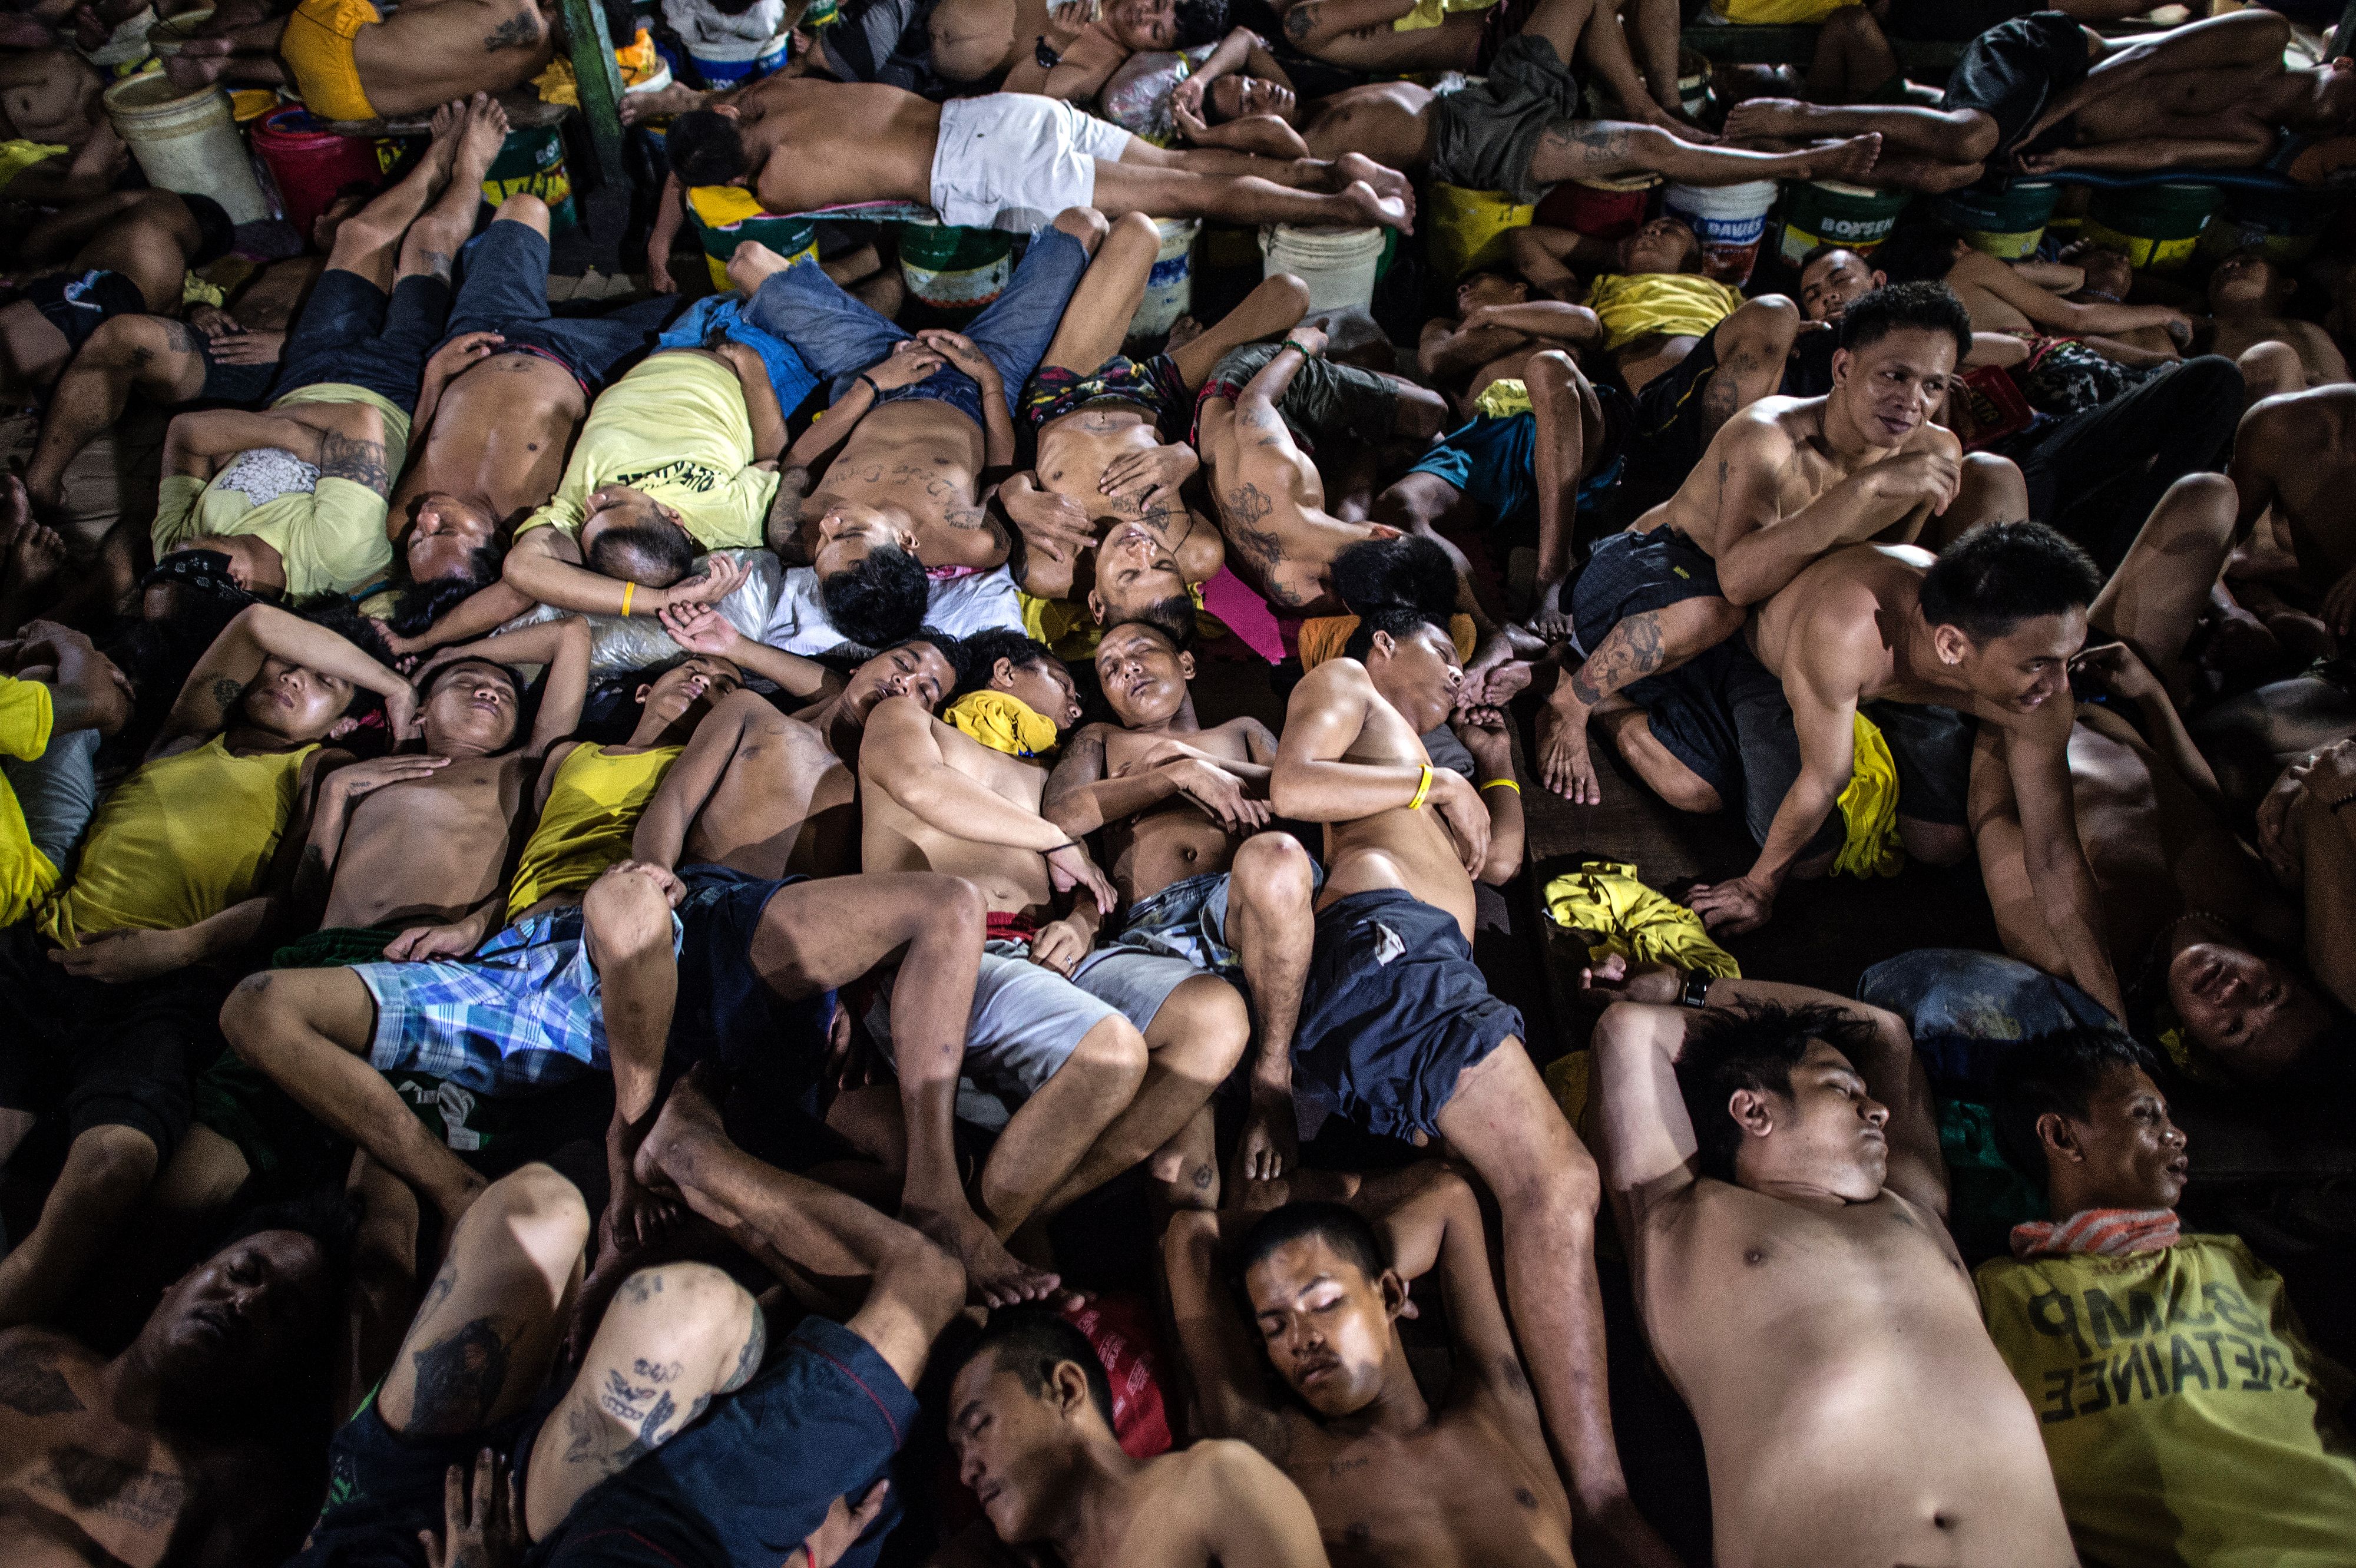 This picture taken on July 21, 2016, shows inmates sleeping inside the Quezon City jail in Manila. Philippine officials said on Aug. 9, 2016, the government would build new jails to address severe congestion made worse by President Rodrigo Duterte's drug war, describing conditions as "inhumane" and "unacceptable" (Noel Celis—AFP/Getty Images)